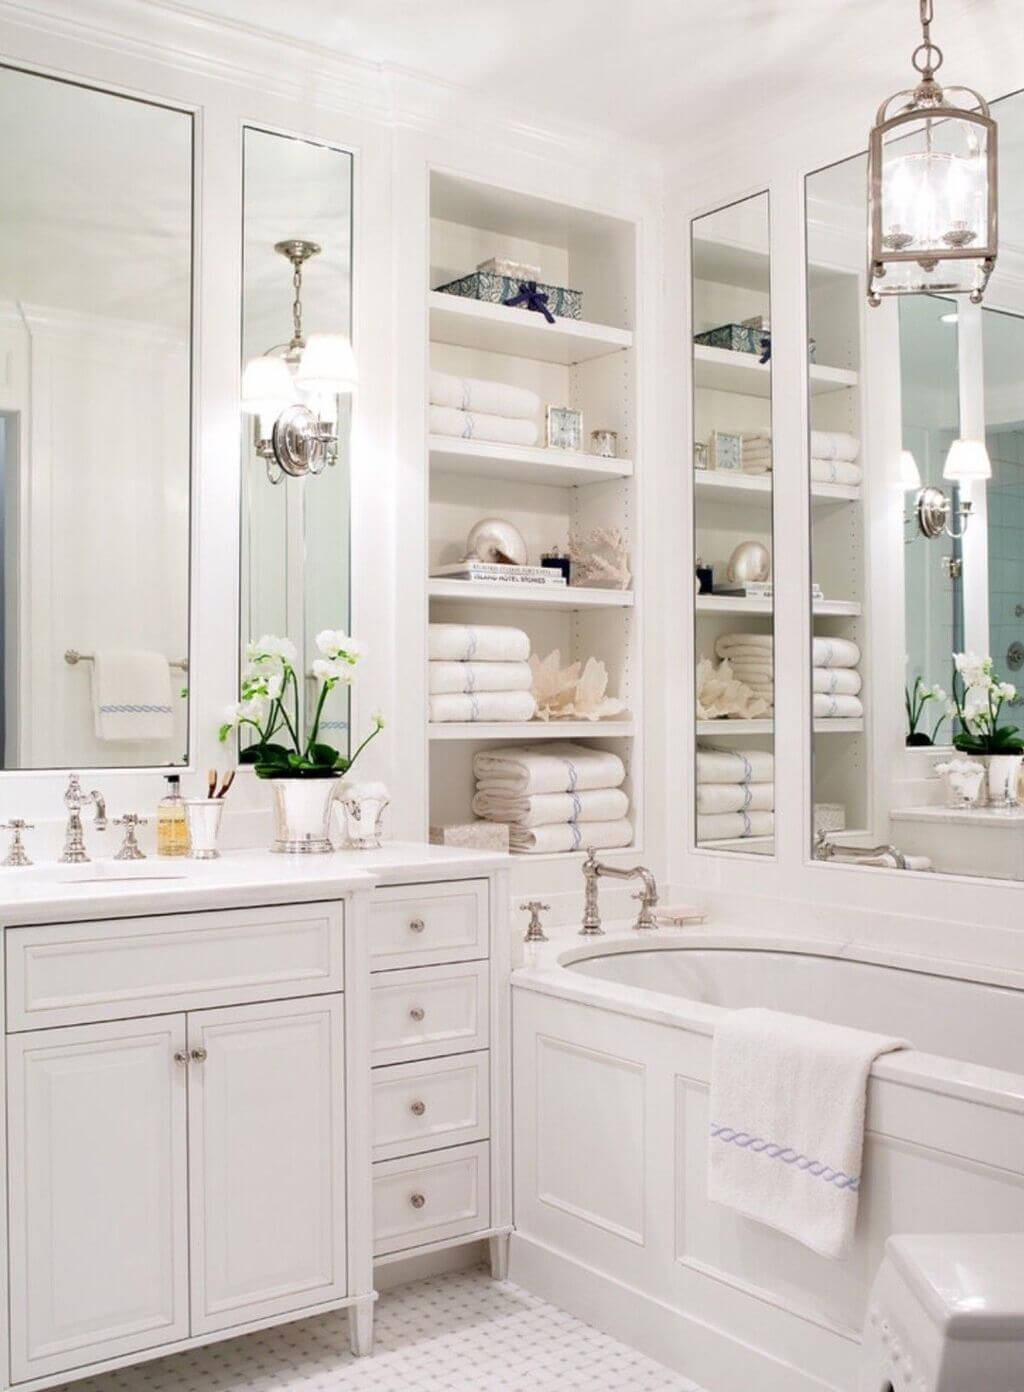 Make the Most of Your Small Bathroom